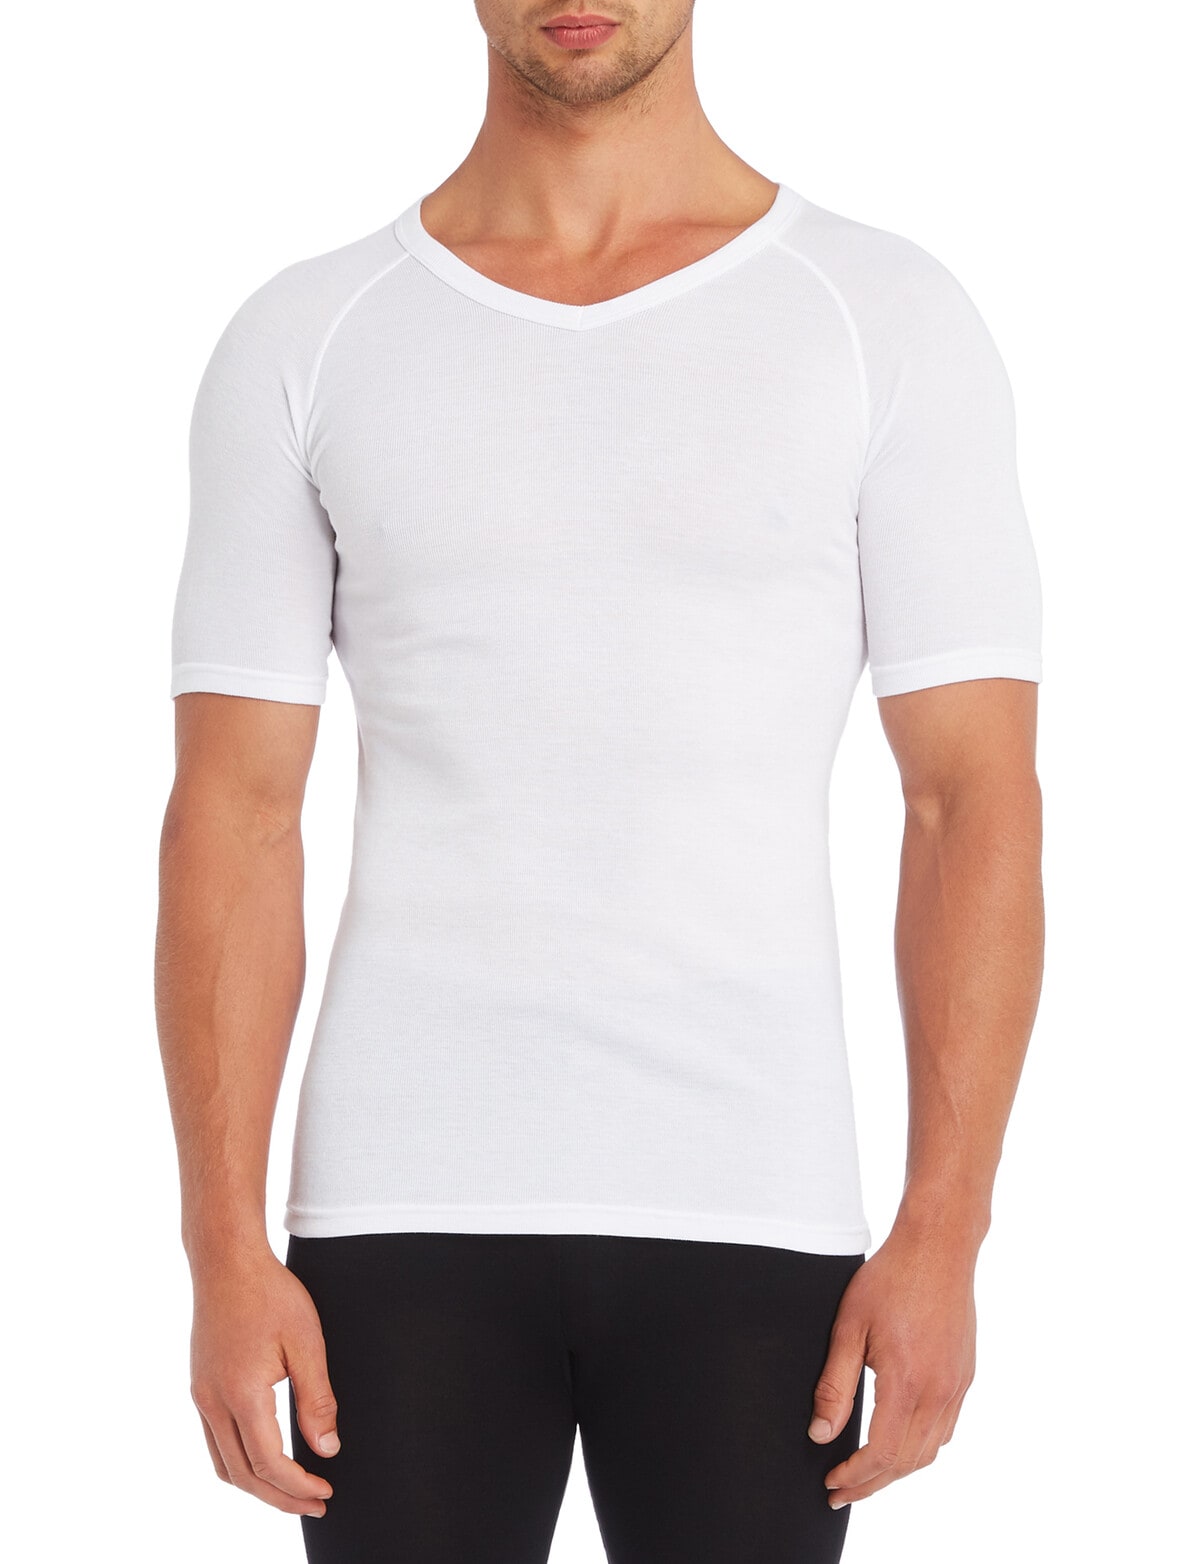 Superfit Poly Viscose Short-Sleeve Thermal Top, White - Thermals